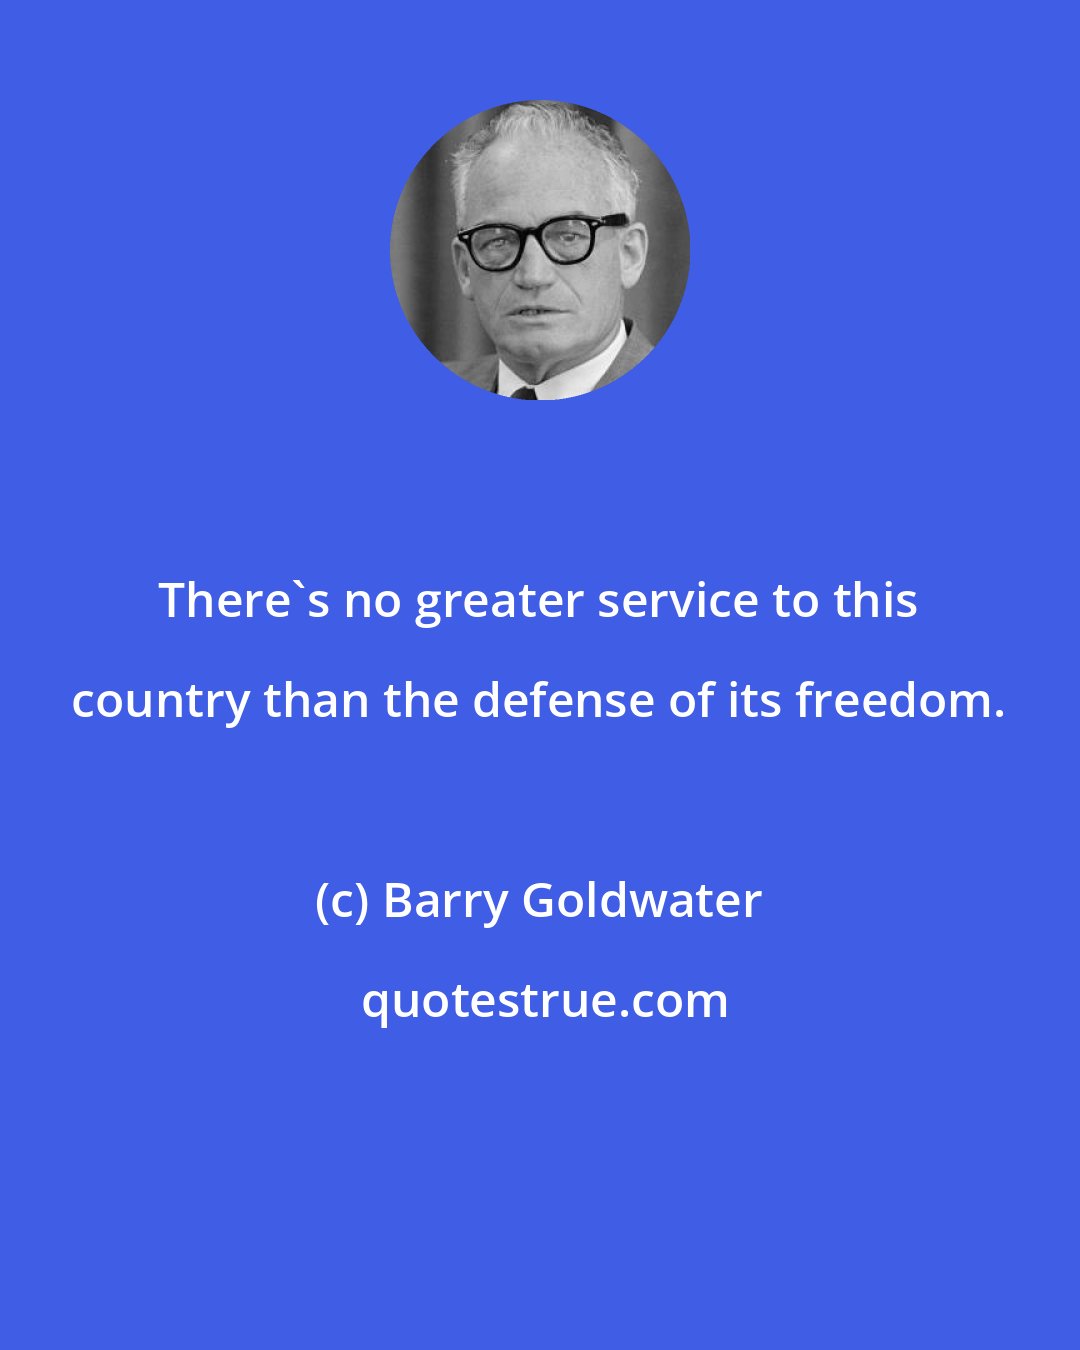 Barry Goldwater: There's no greater service to this country than the defense of its freedom.